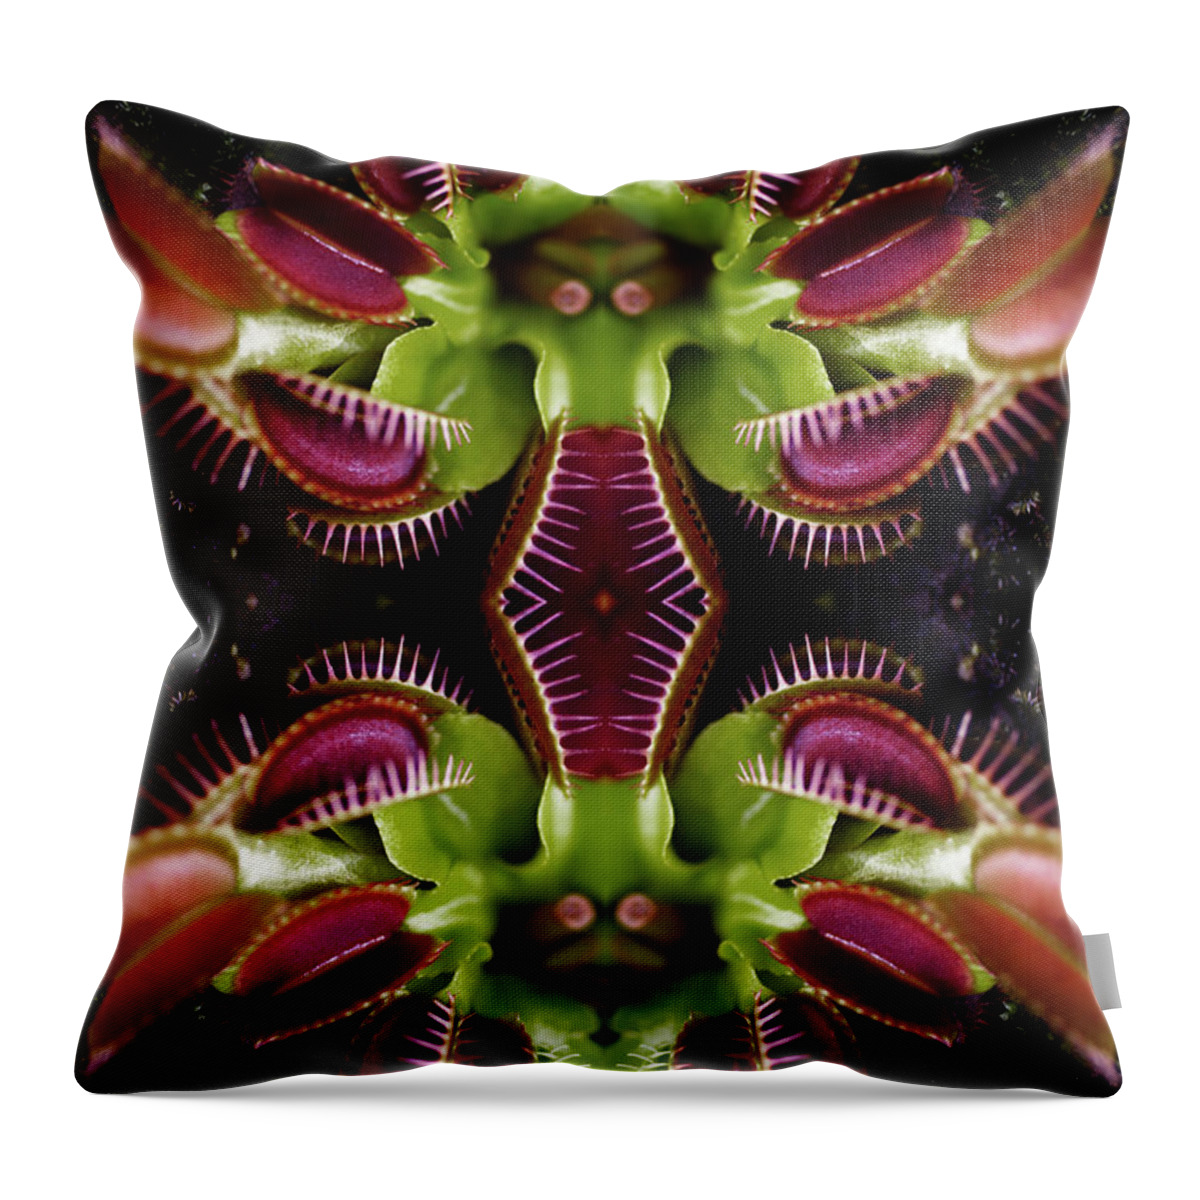 Tranquility Throw Pillow featuring the photograph Kaleidoscope Composite Of Venus Flytrap by Silvia Otte